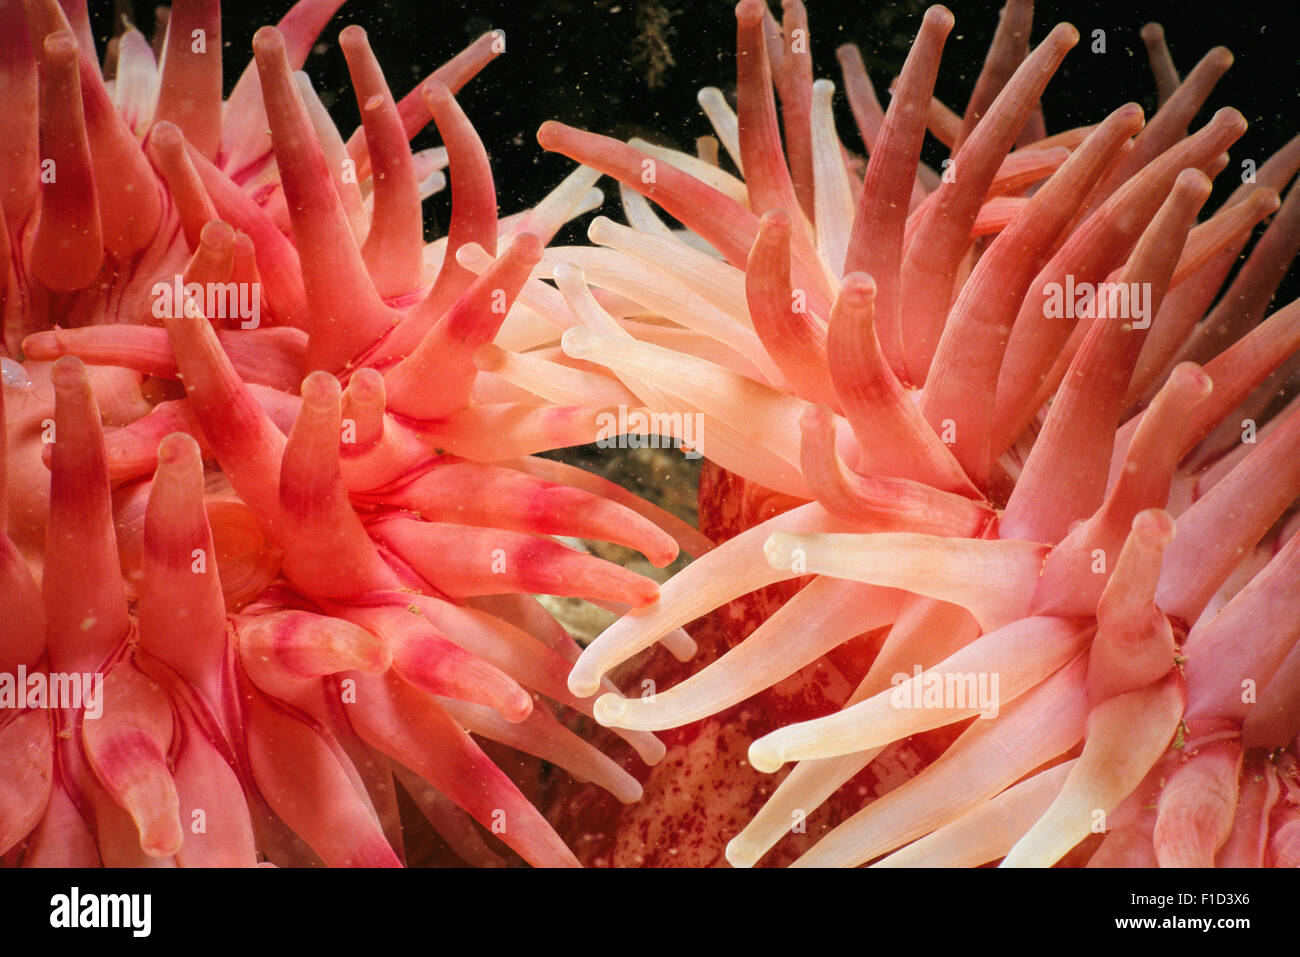 Tentacles of Northern Red Anemones (Tealia crassicornis or Urticina felina), opened and trapping plankton. Stock Photo